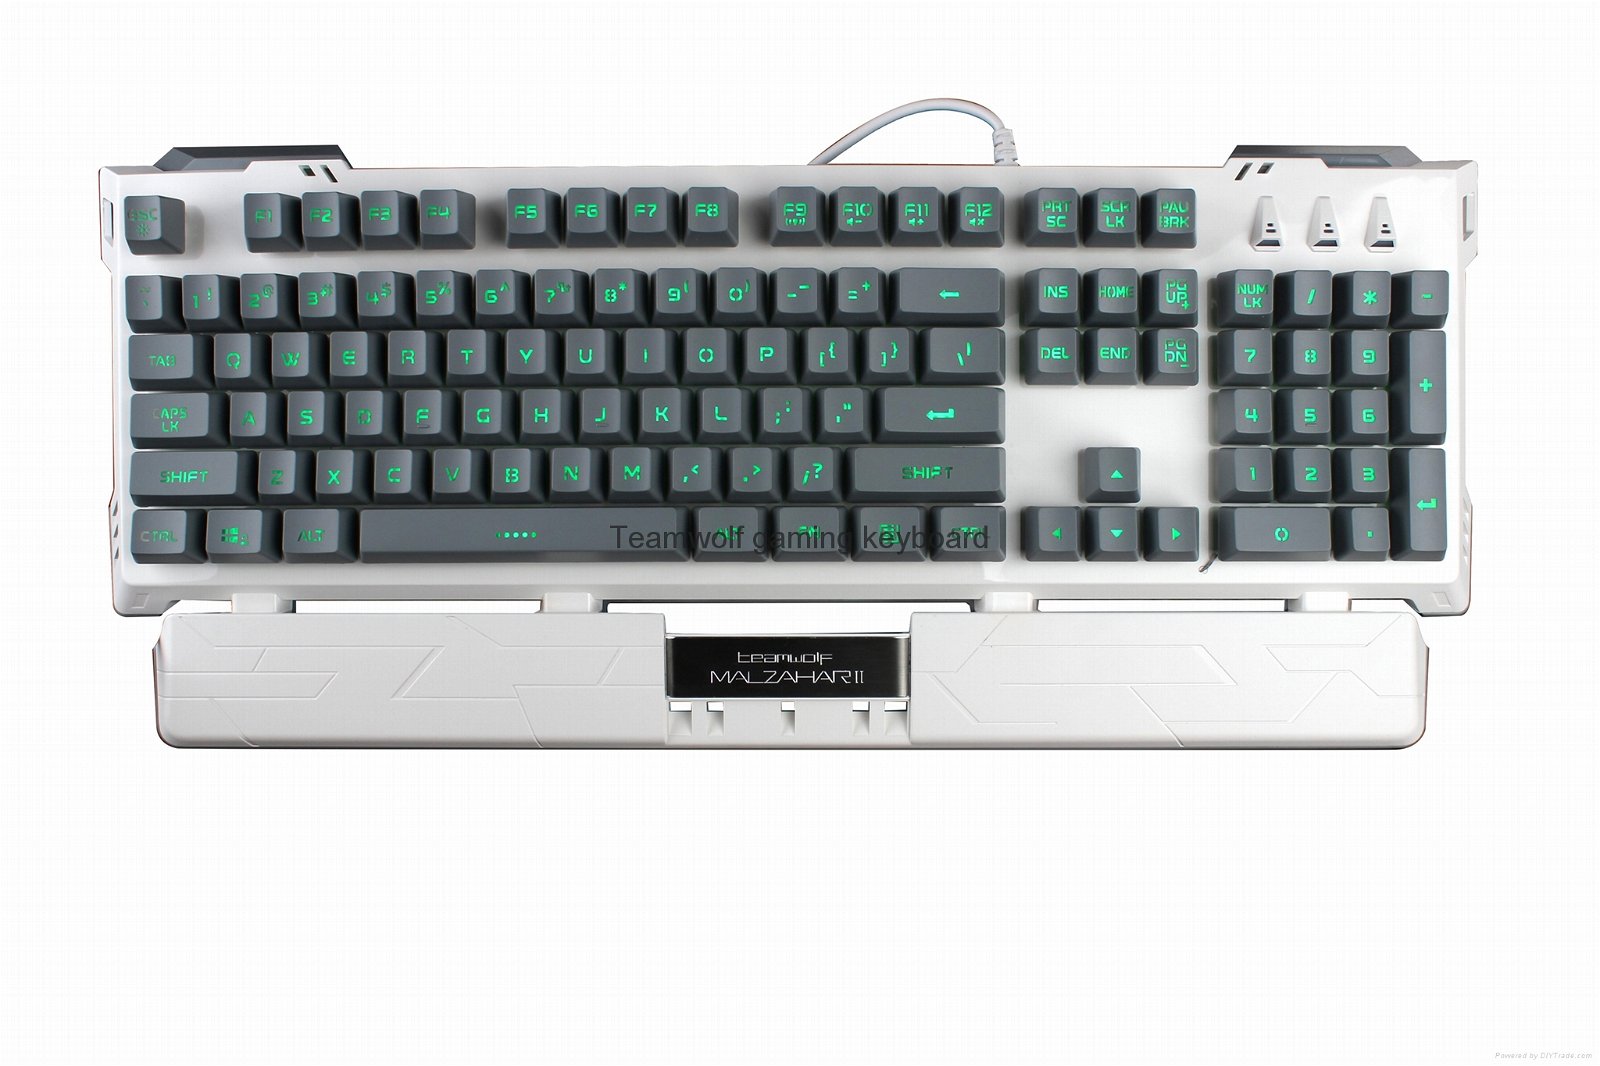 Arbiter-TEAMWOLF wired Membrain gaming keyboard with color Mixed light-AK616 4